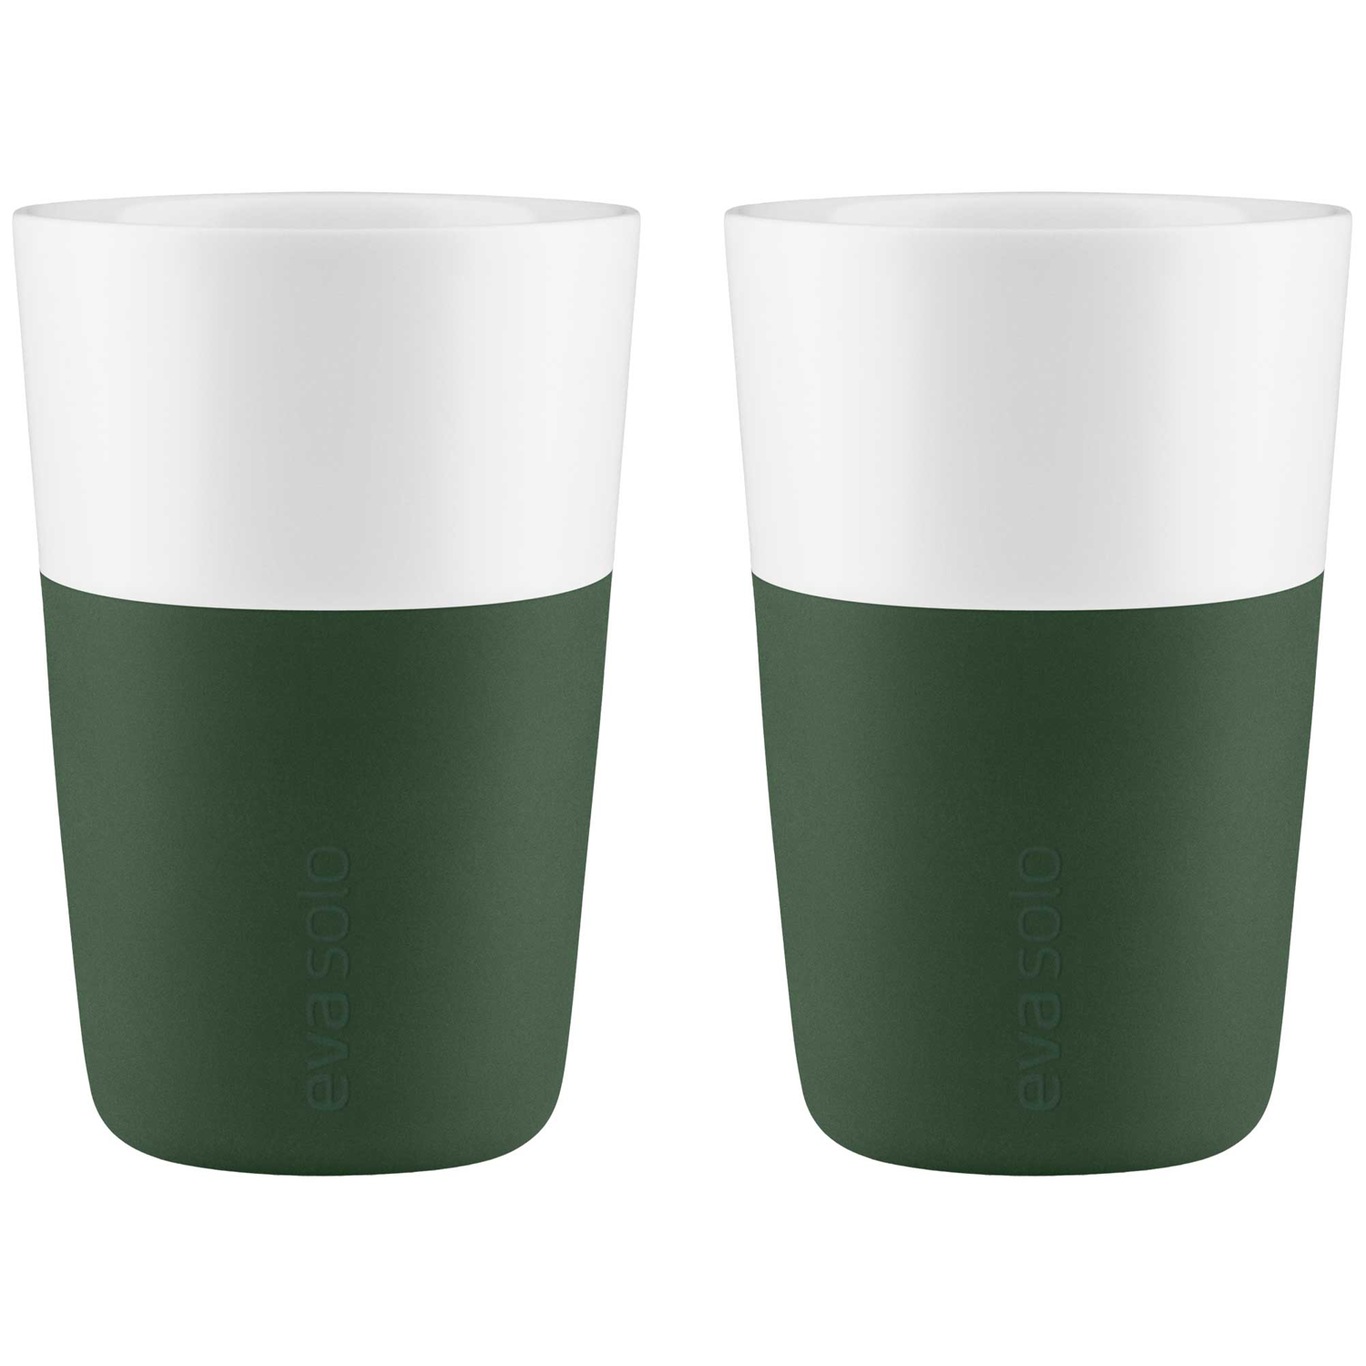 Lattemugg 36 cl 2-pack, Emerald Green